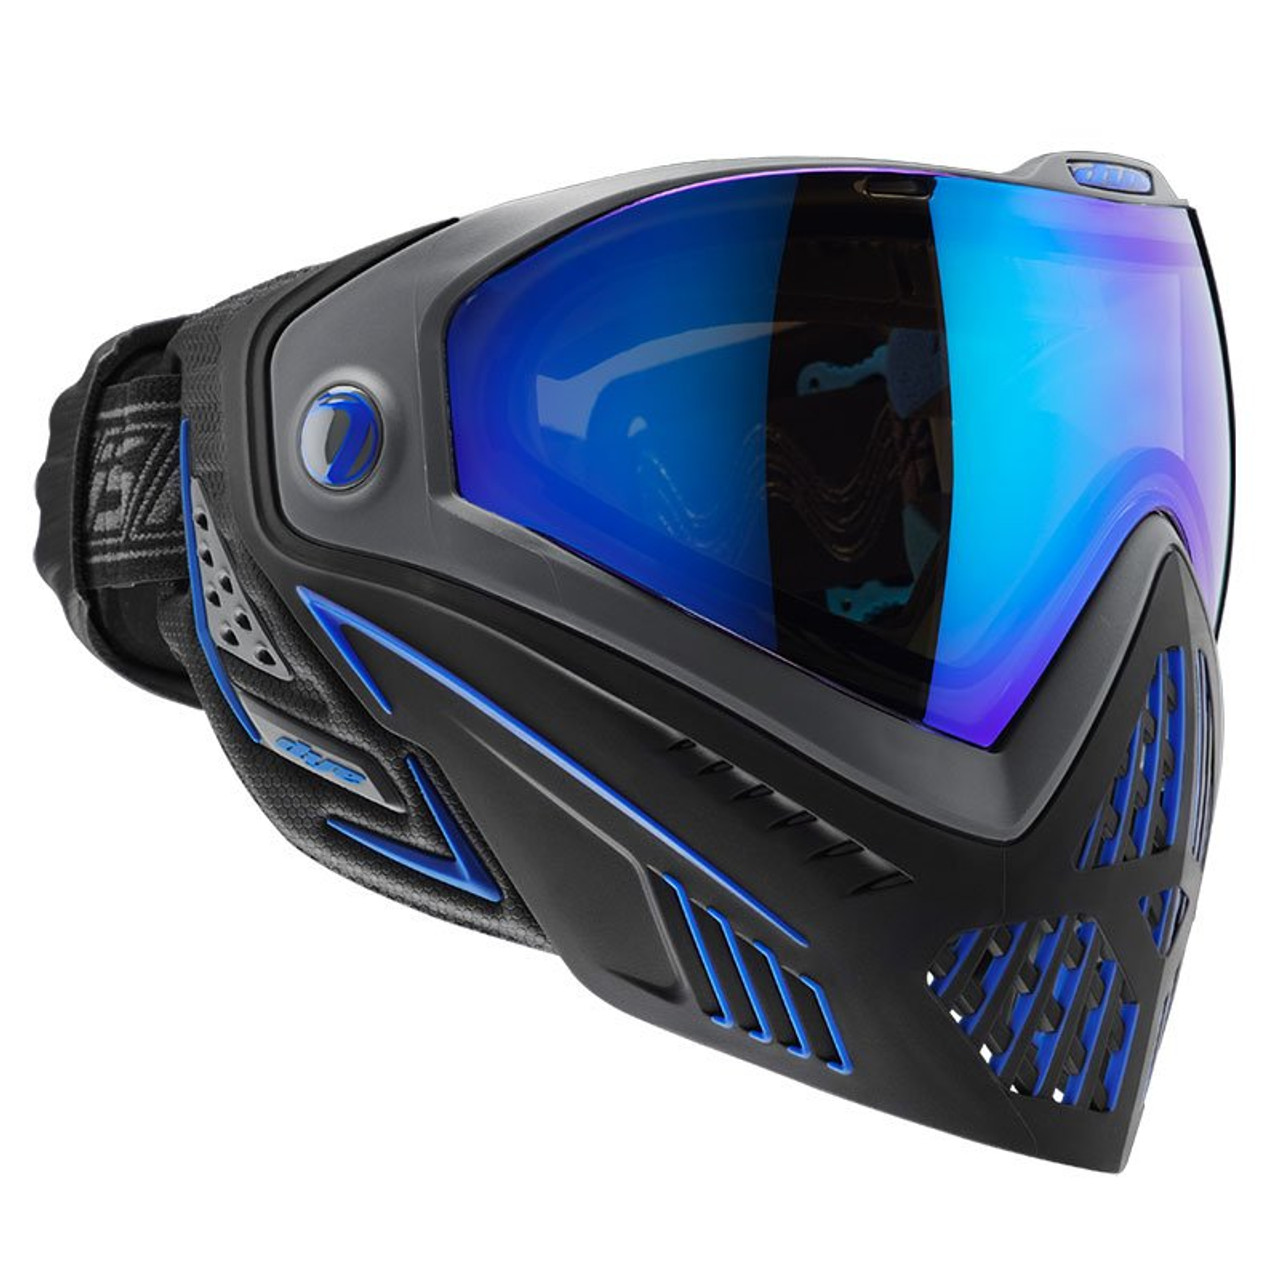 DYE i5 Paintball Mask Thermal Storm Black/Blue Badlands Paintball Gear  Canada